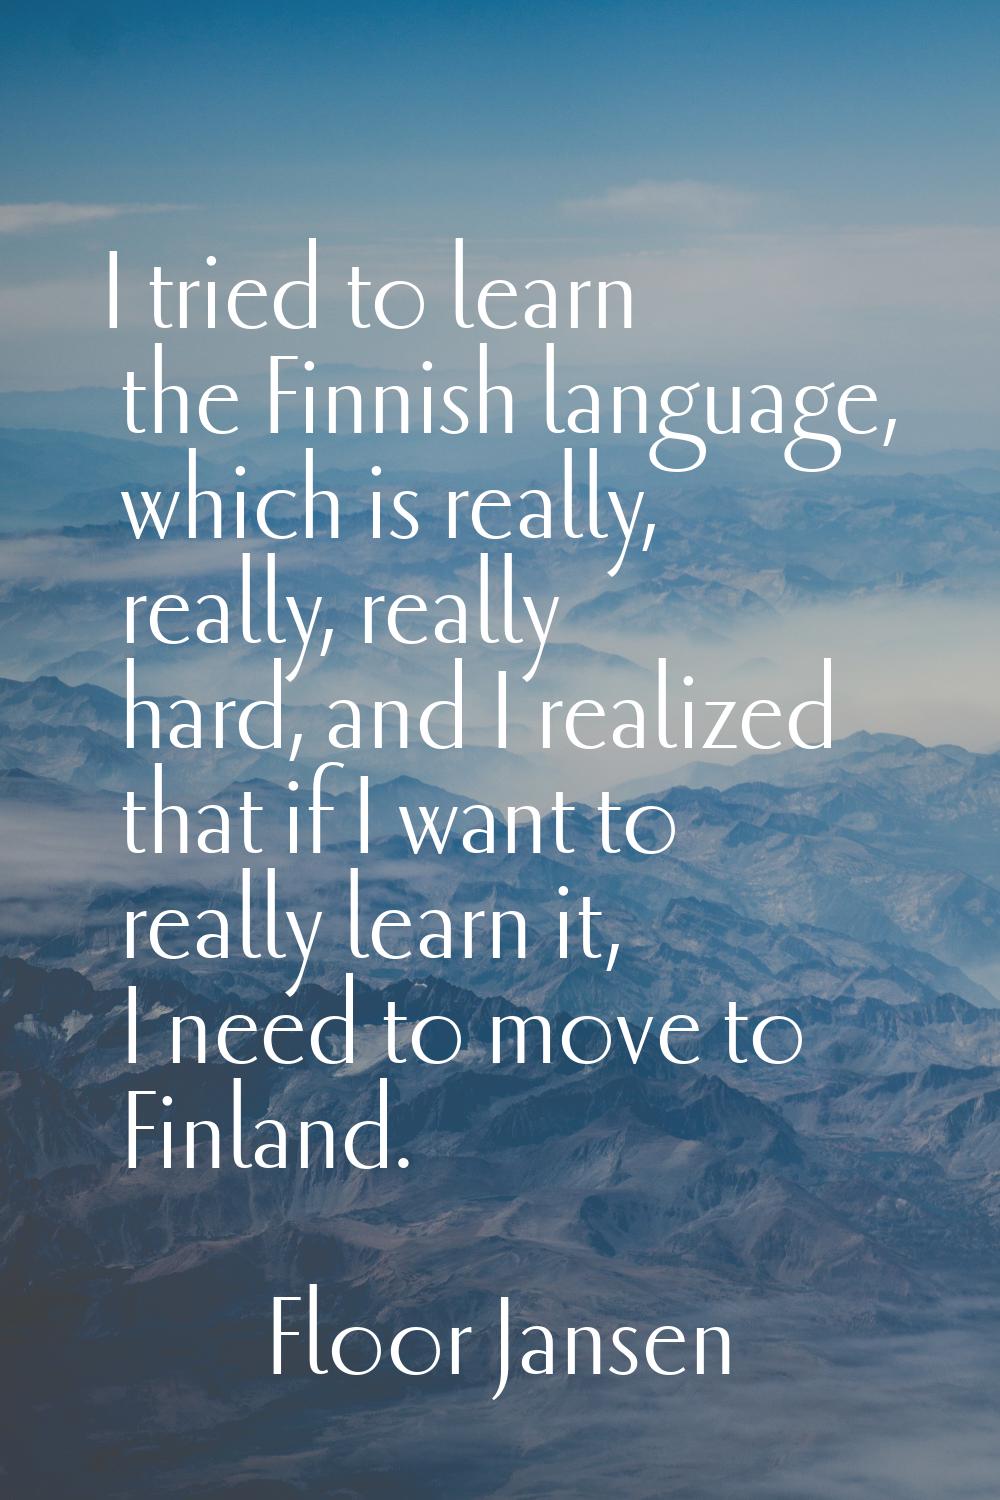 I tried to learn the Finnish language, which is really, really, really hard, and I realized that if